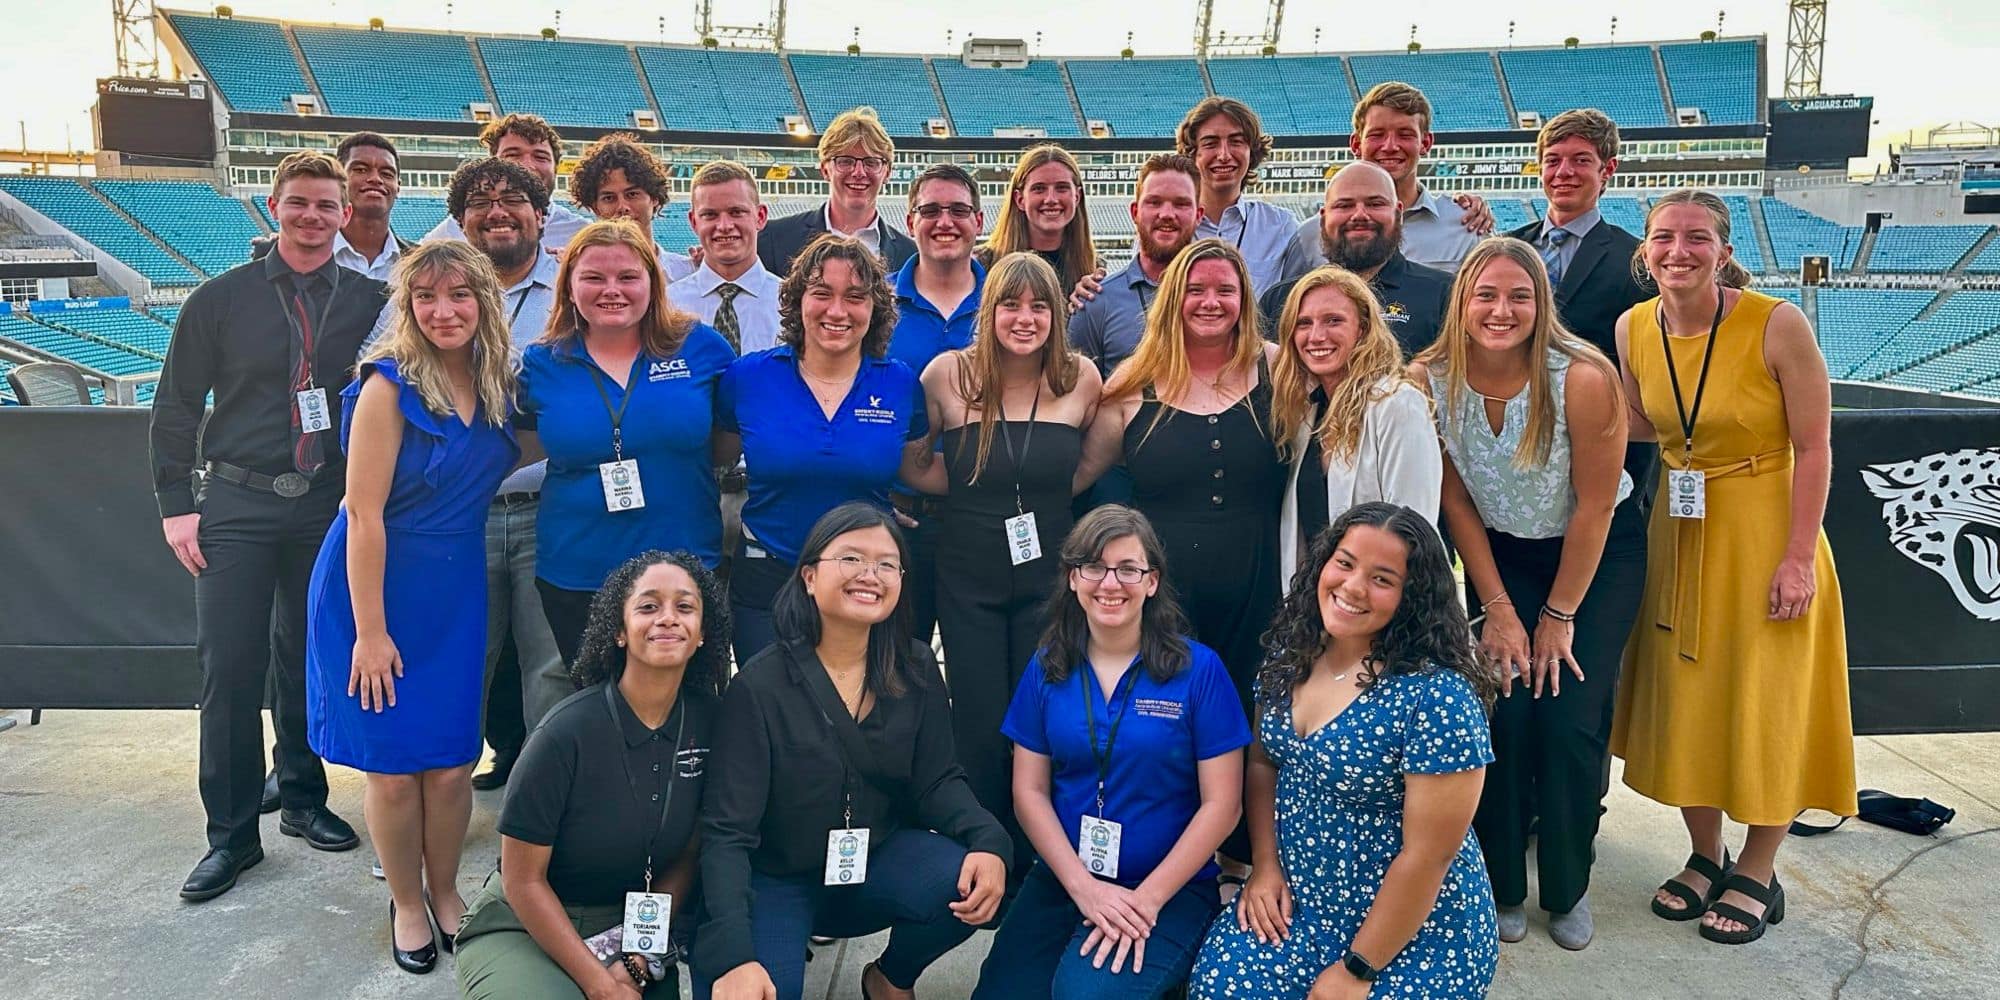 Abigail Valley and other Embry-Riddle Students in Jacksonville for the 2023 ASCE Southeast Student Symposium (Photo: Abigail Valley)